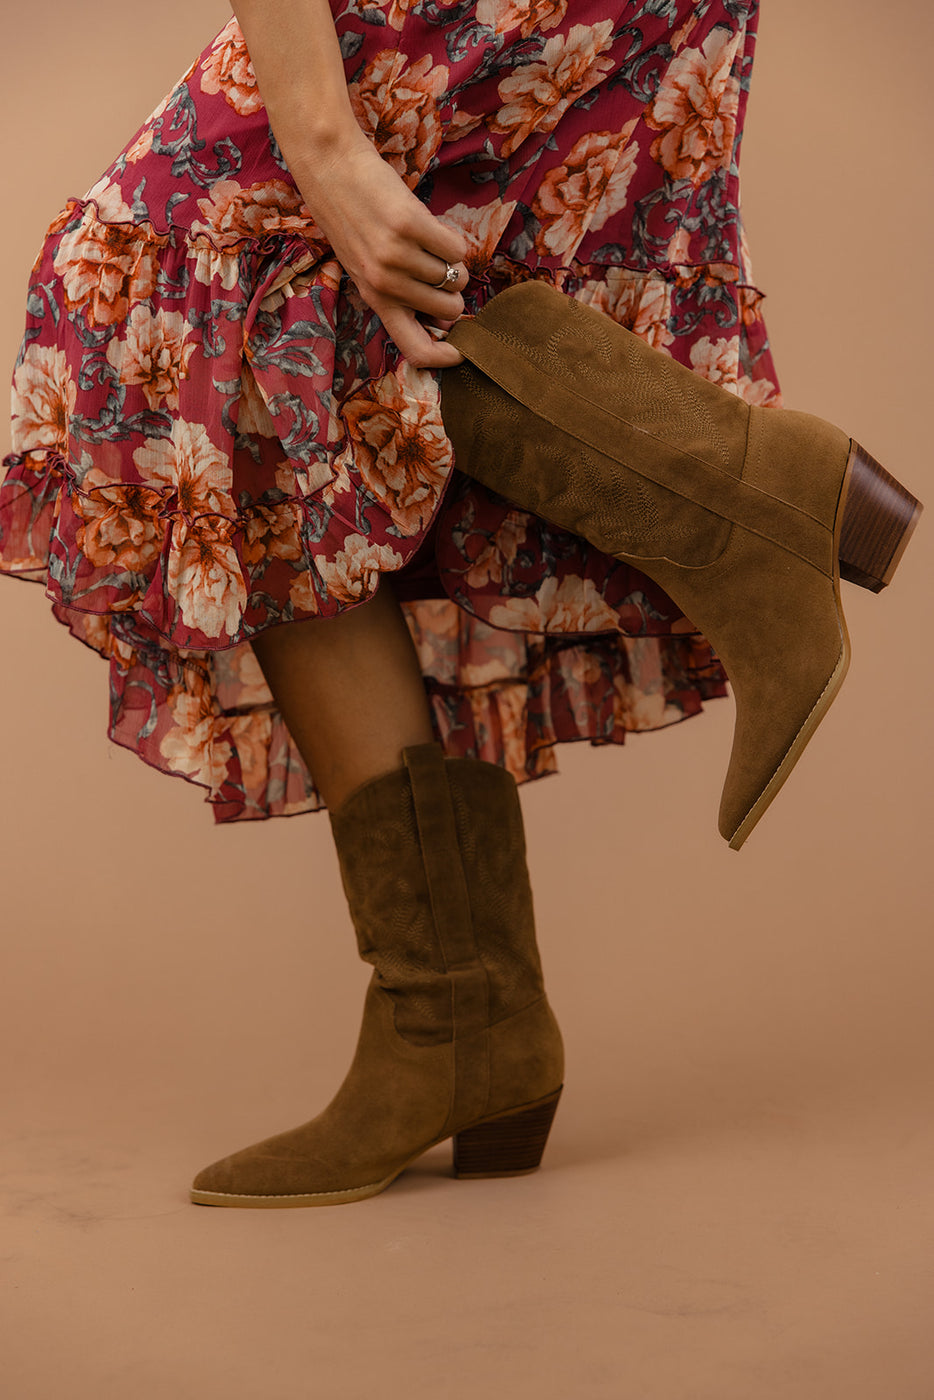 a person wearing a dress and boots